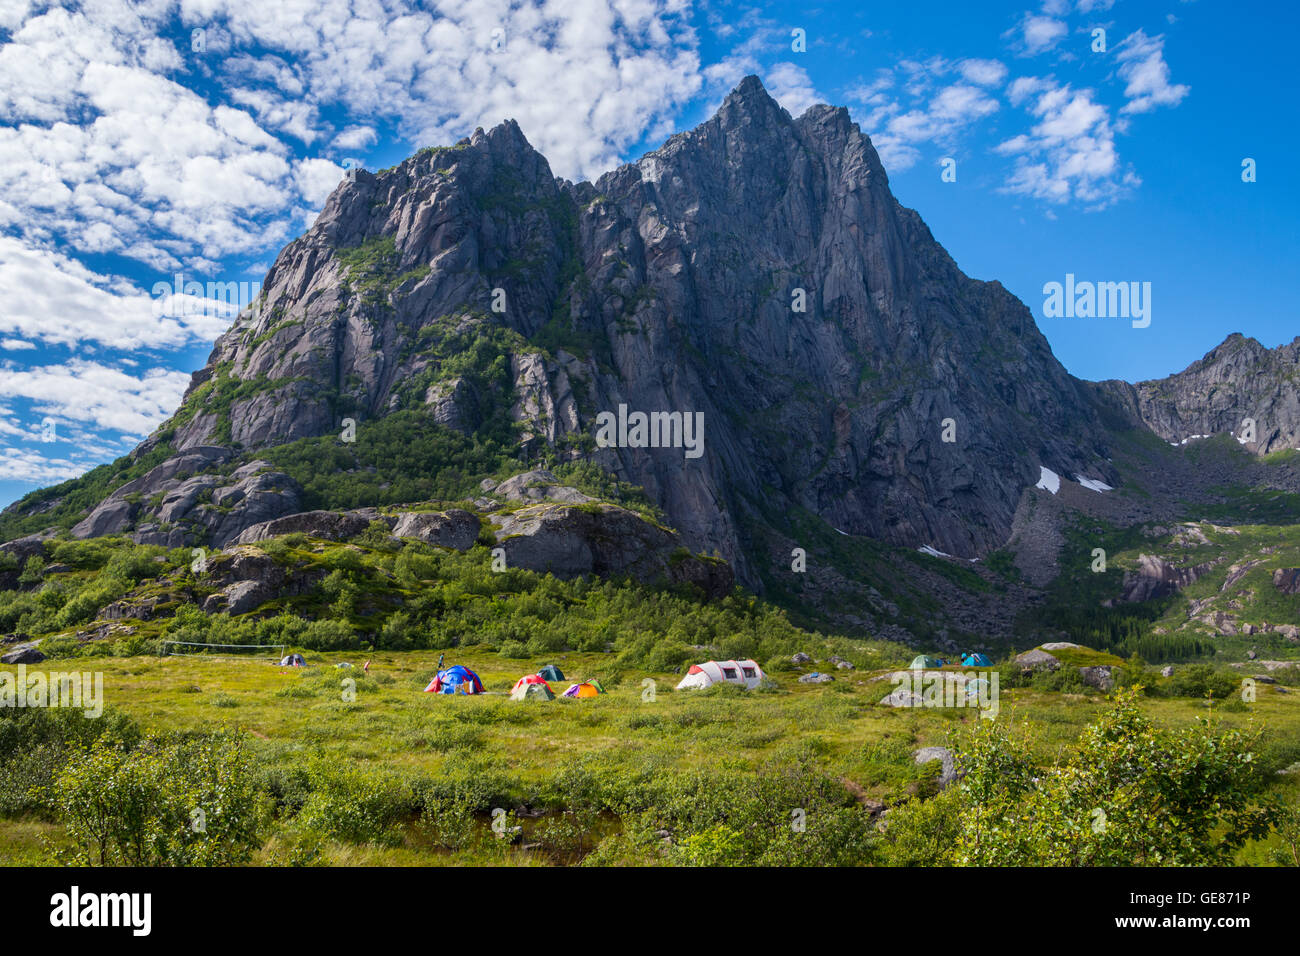 Colorful tents, wild camping group in mountains, Lofoten, Arctic Norway Stock Photo